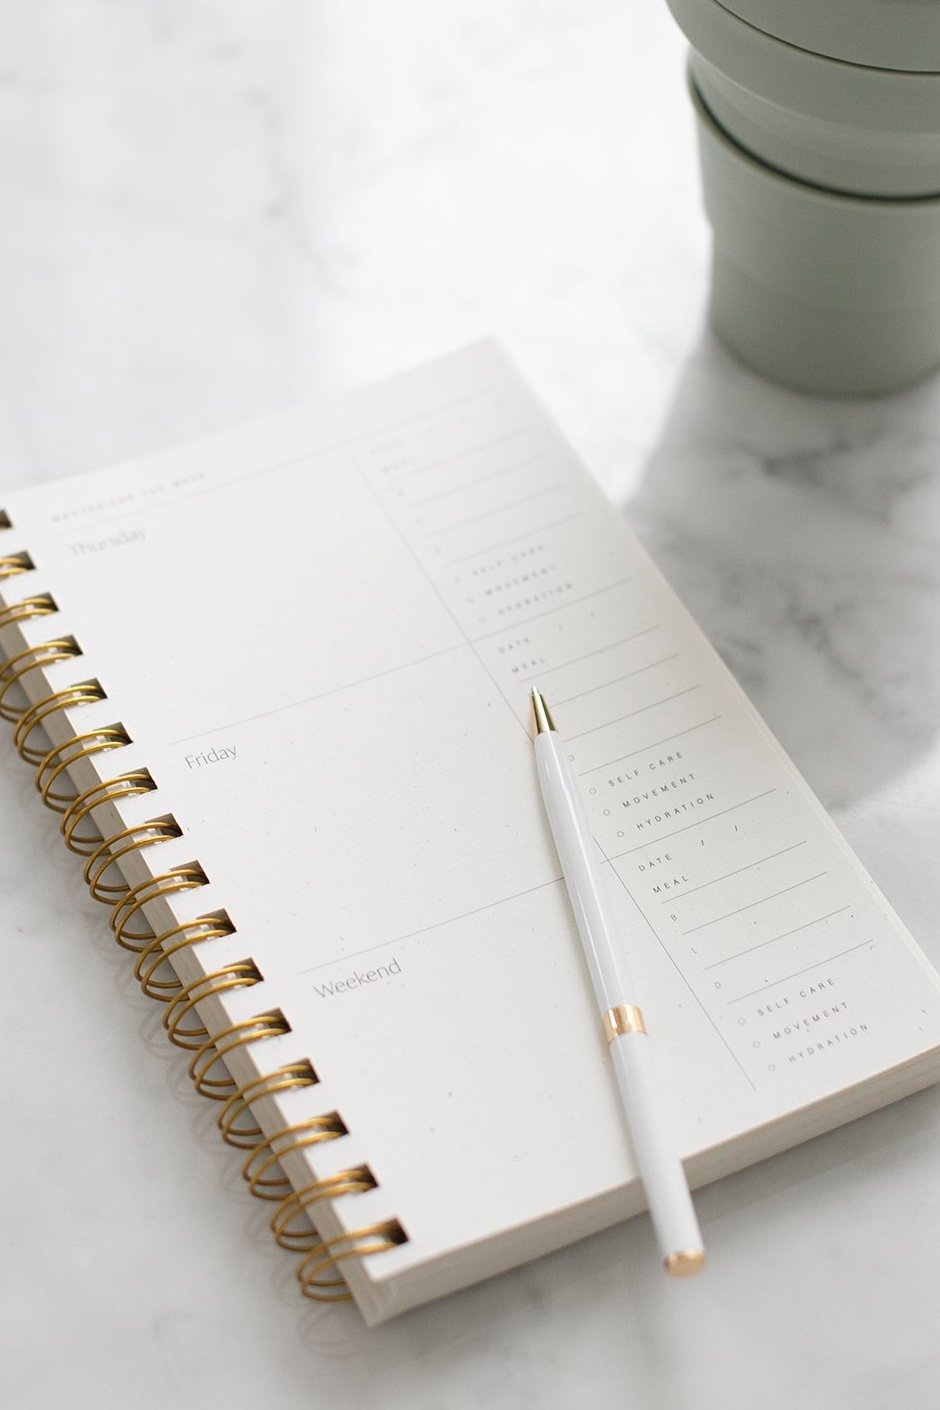 Weekly planner sitting on marble counter with coffee mug and pen